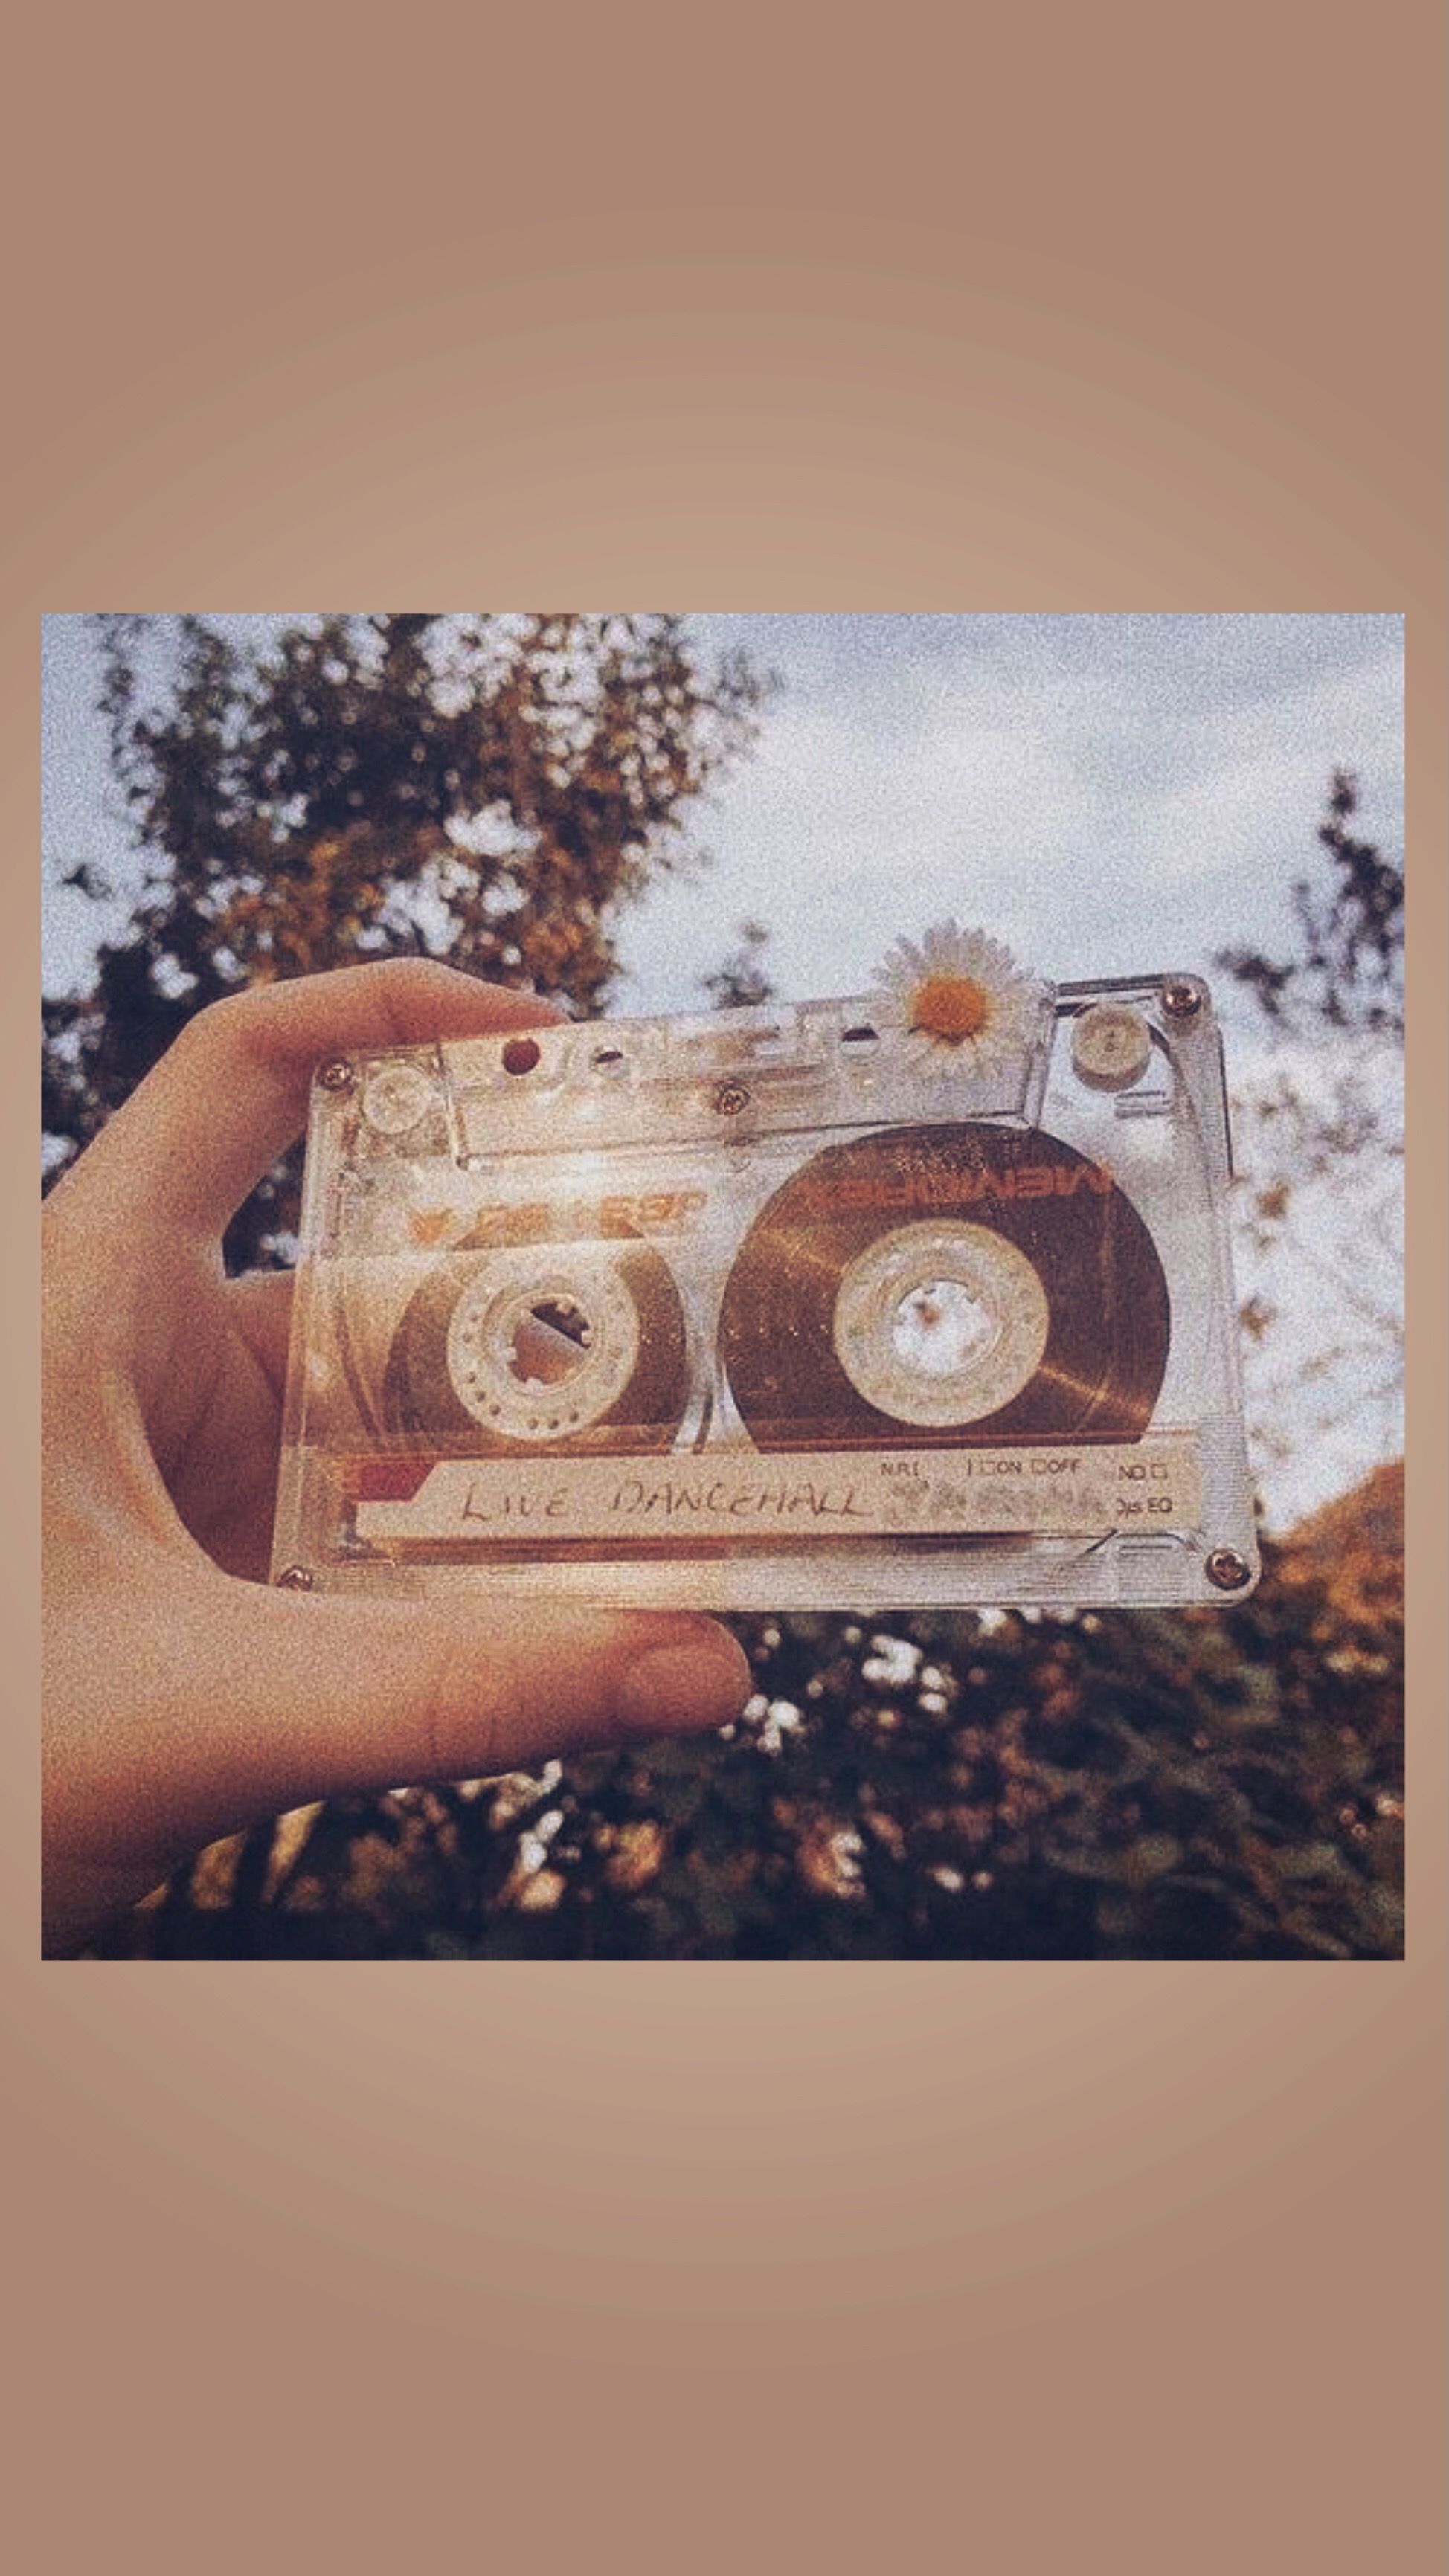 A person holding a cassette tape with a flower on it - Vintage